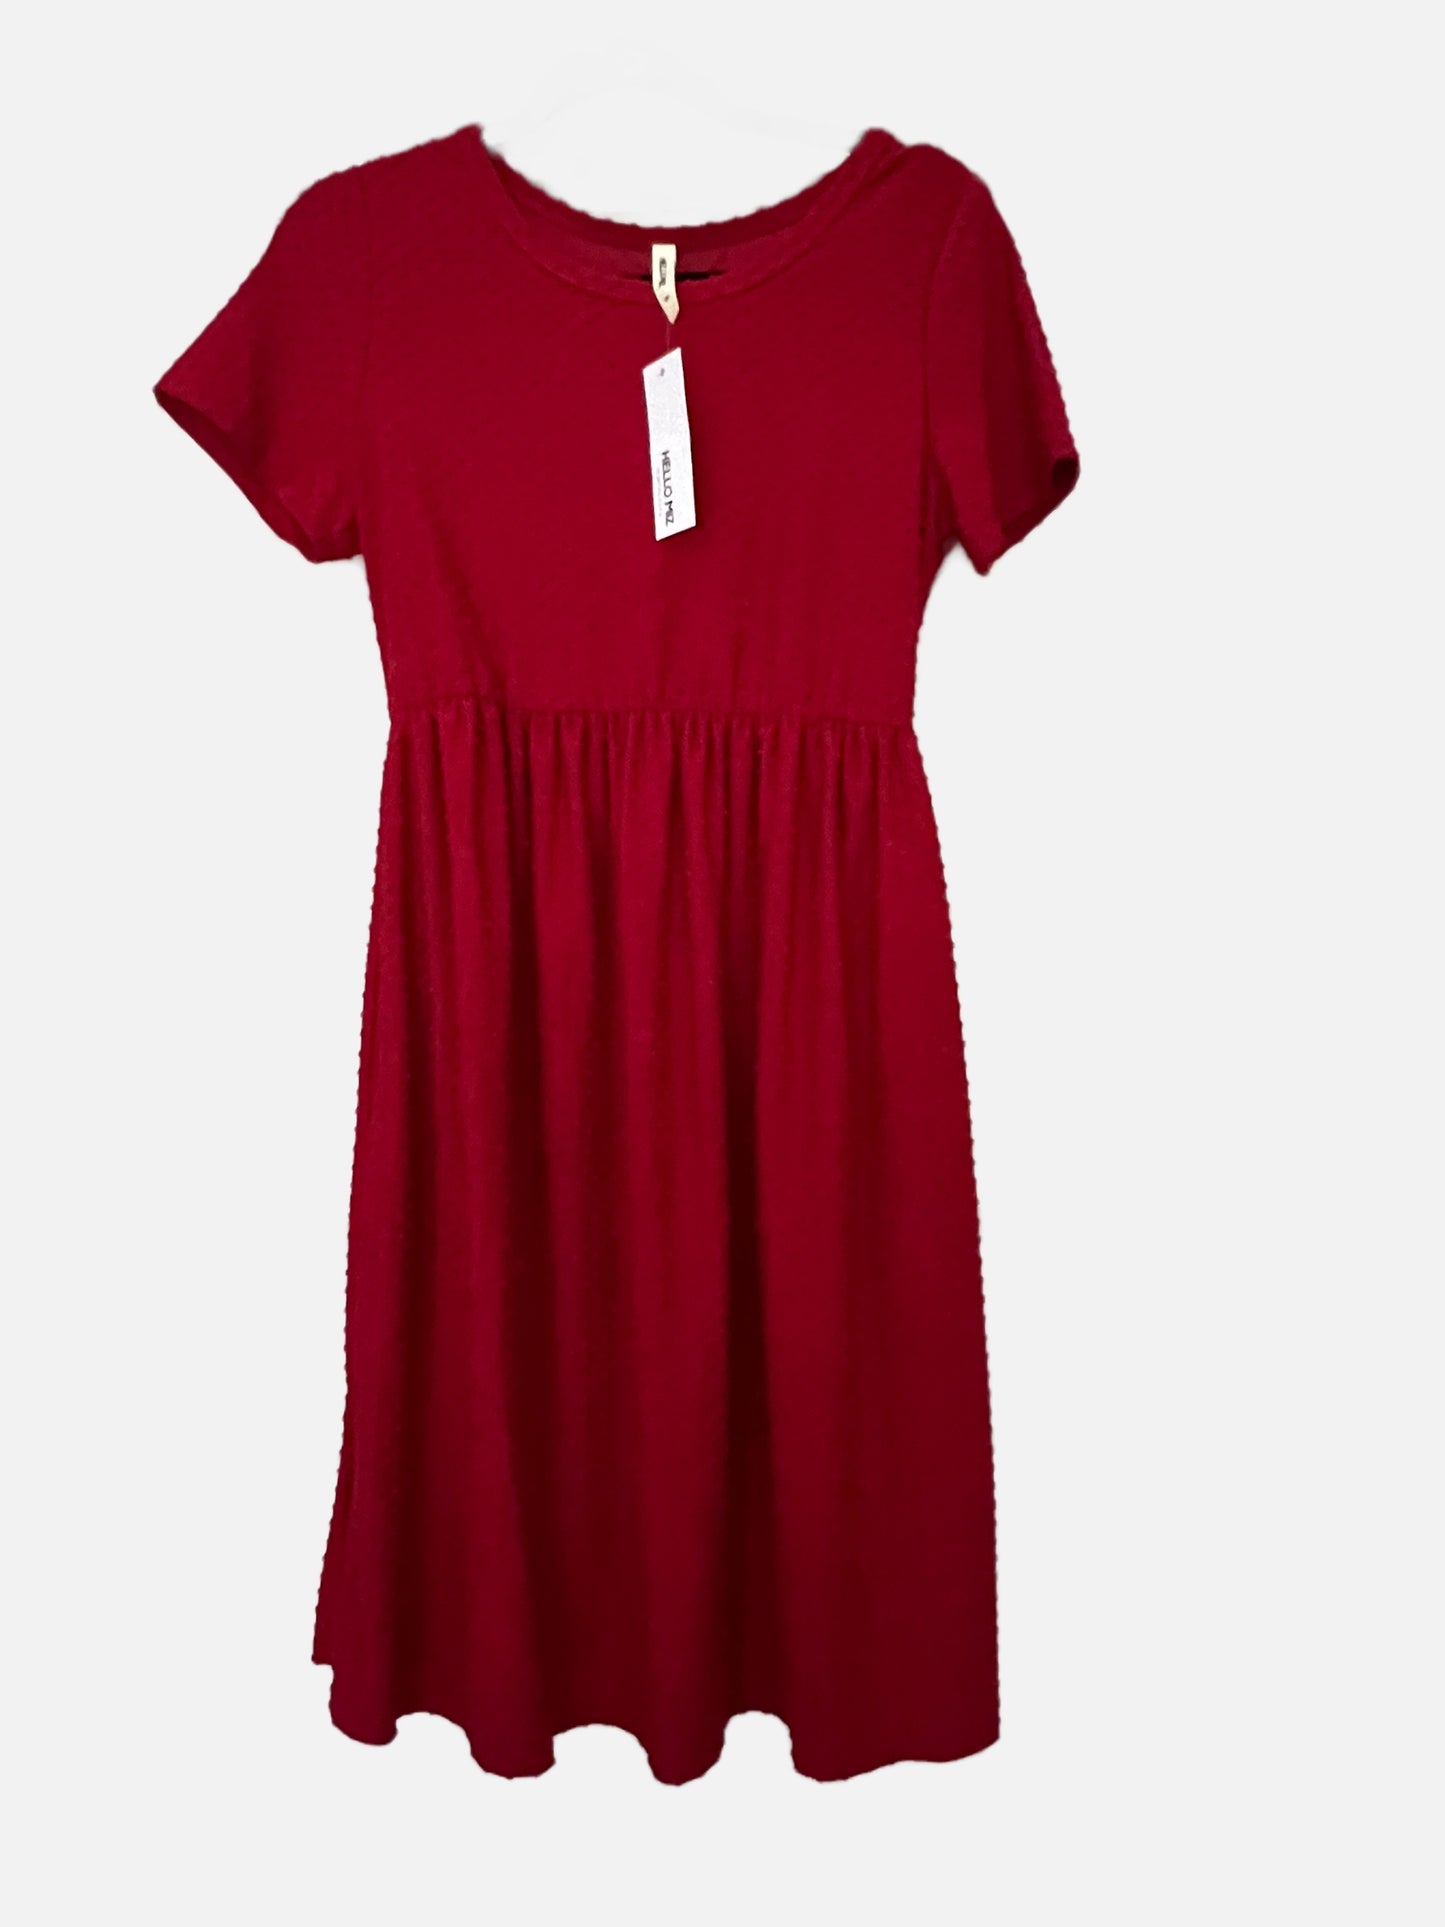 Red maternity dress, size S, NWT